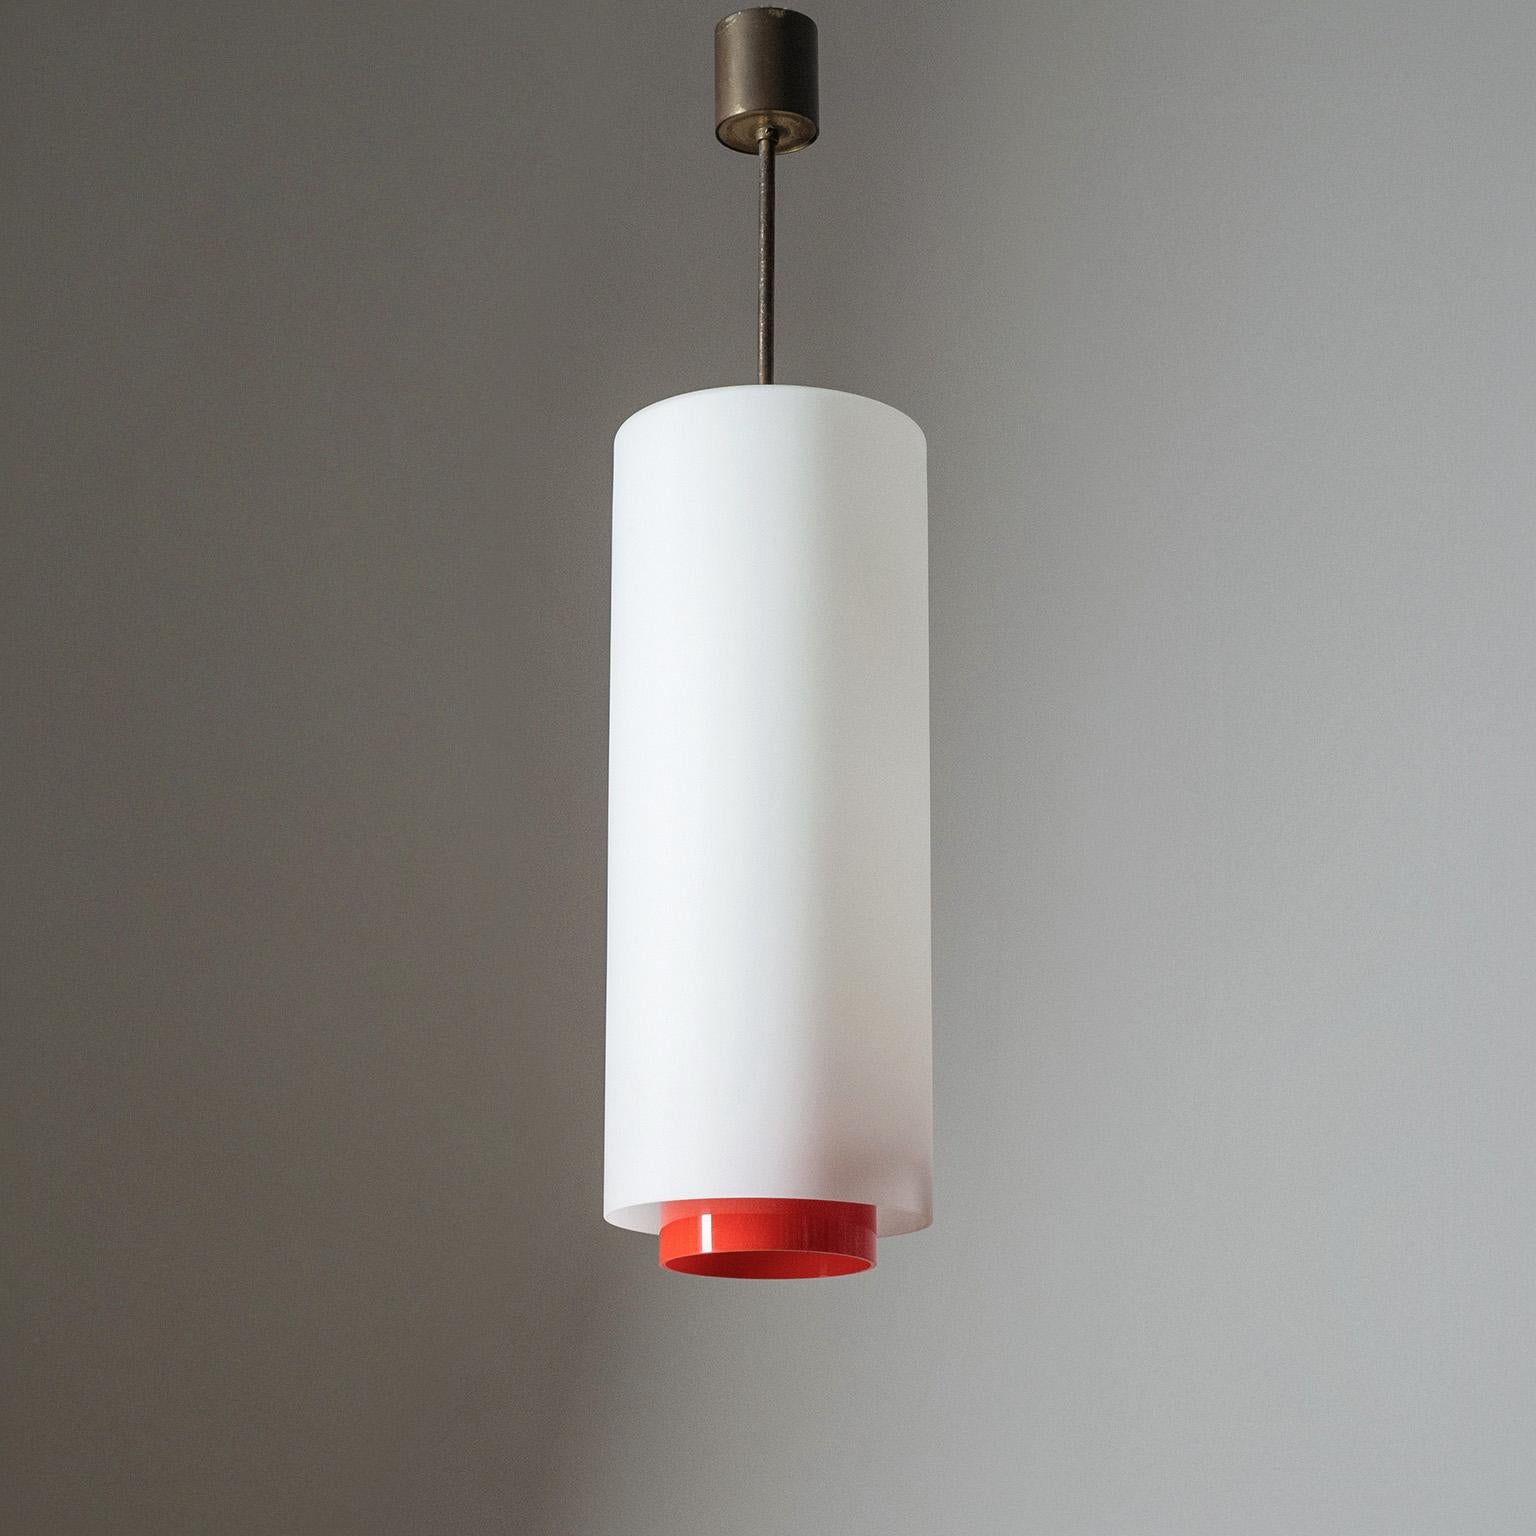 Rare Stilnovo ceiling light or lantern with a long satin glass diffuser, bright red acrylic shade and brass hardware from the 1950s. Four original brass and ceramic E14 sockets with new wiring. Original manufacturers label.
Measures: Height 75cm